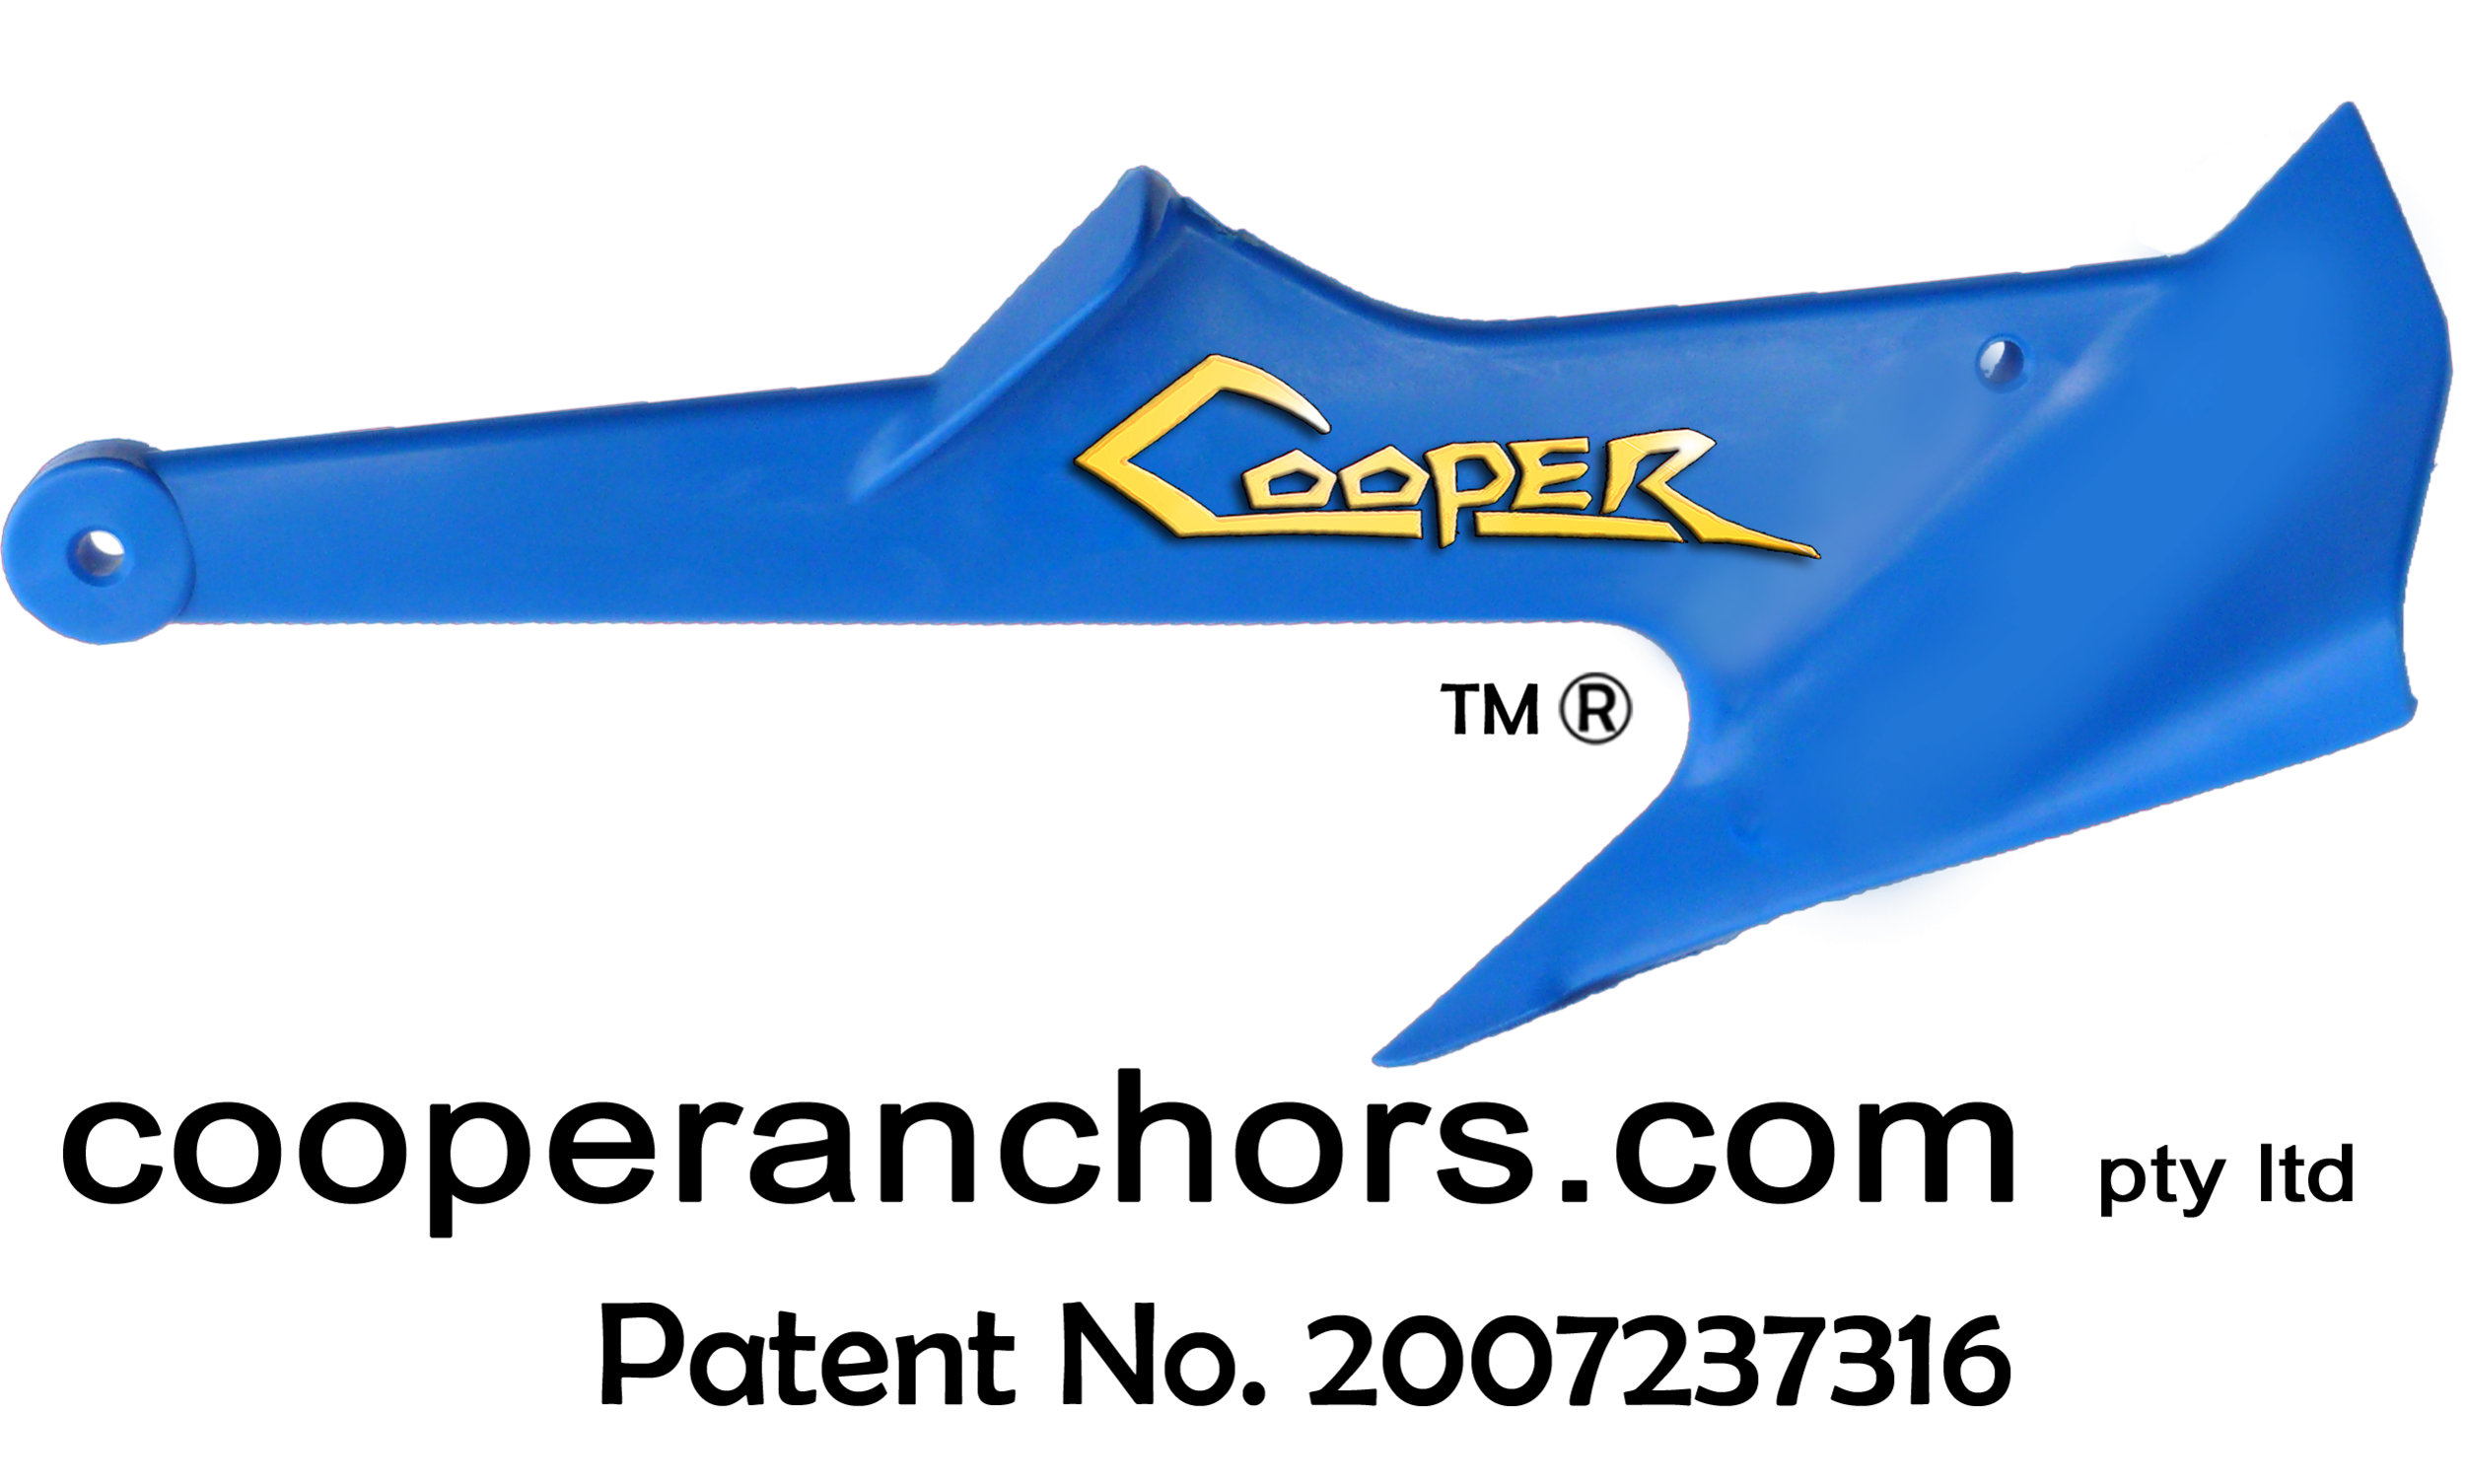 UK STOCK Anchor Cooper Anchor 1KG Great anchor for Jet Skis and boats Up to 3m 